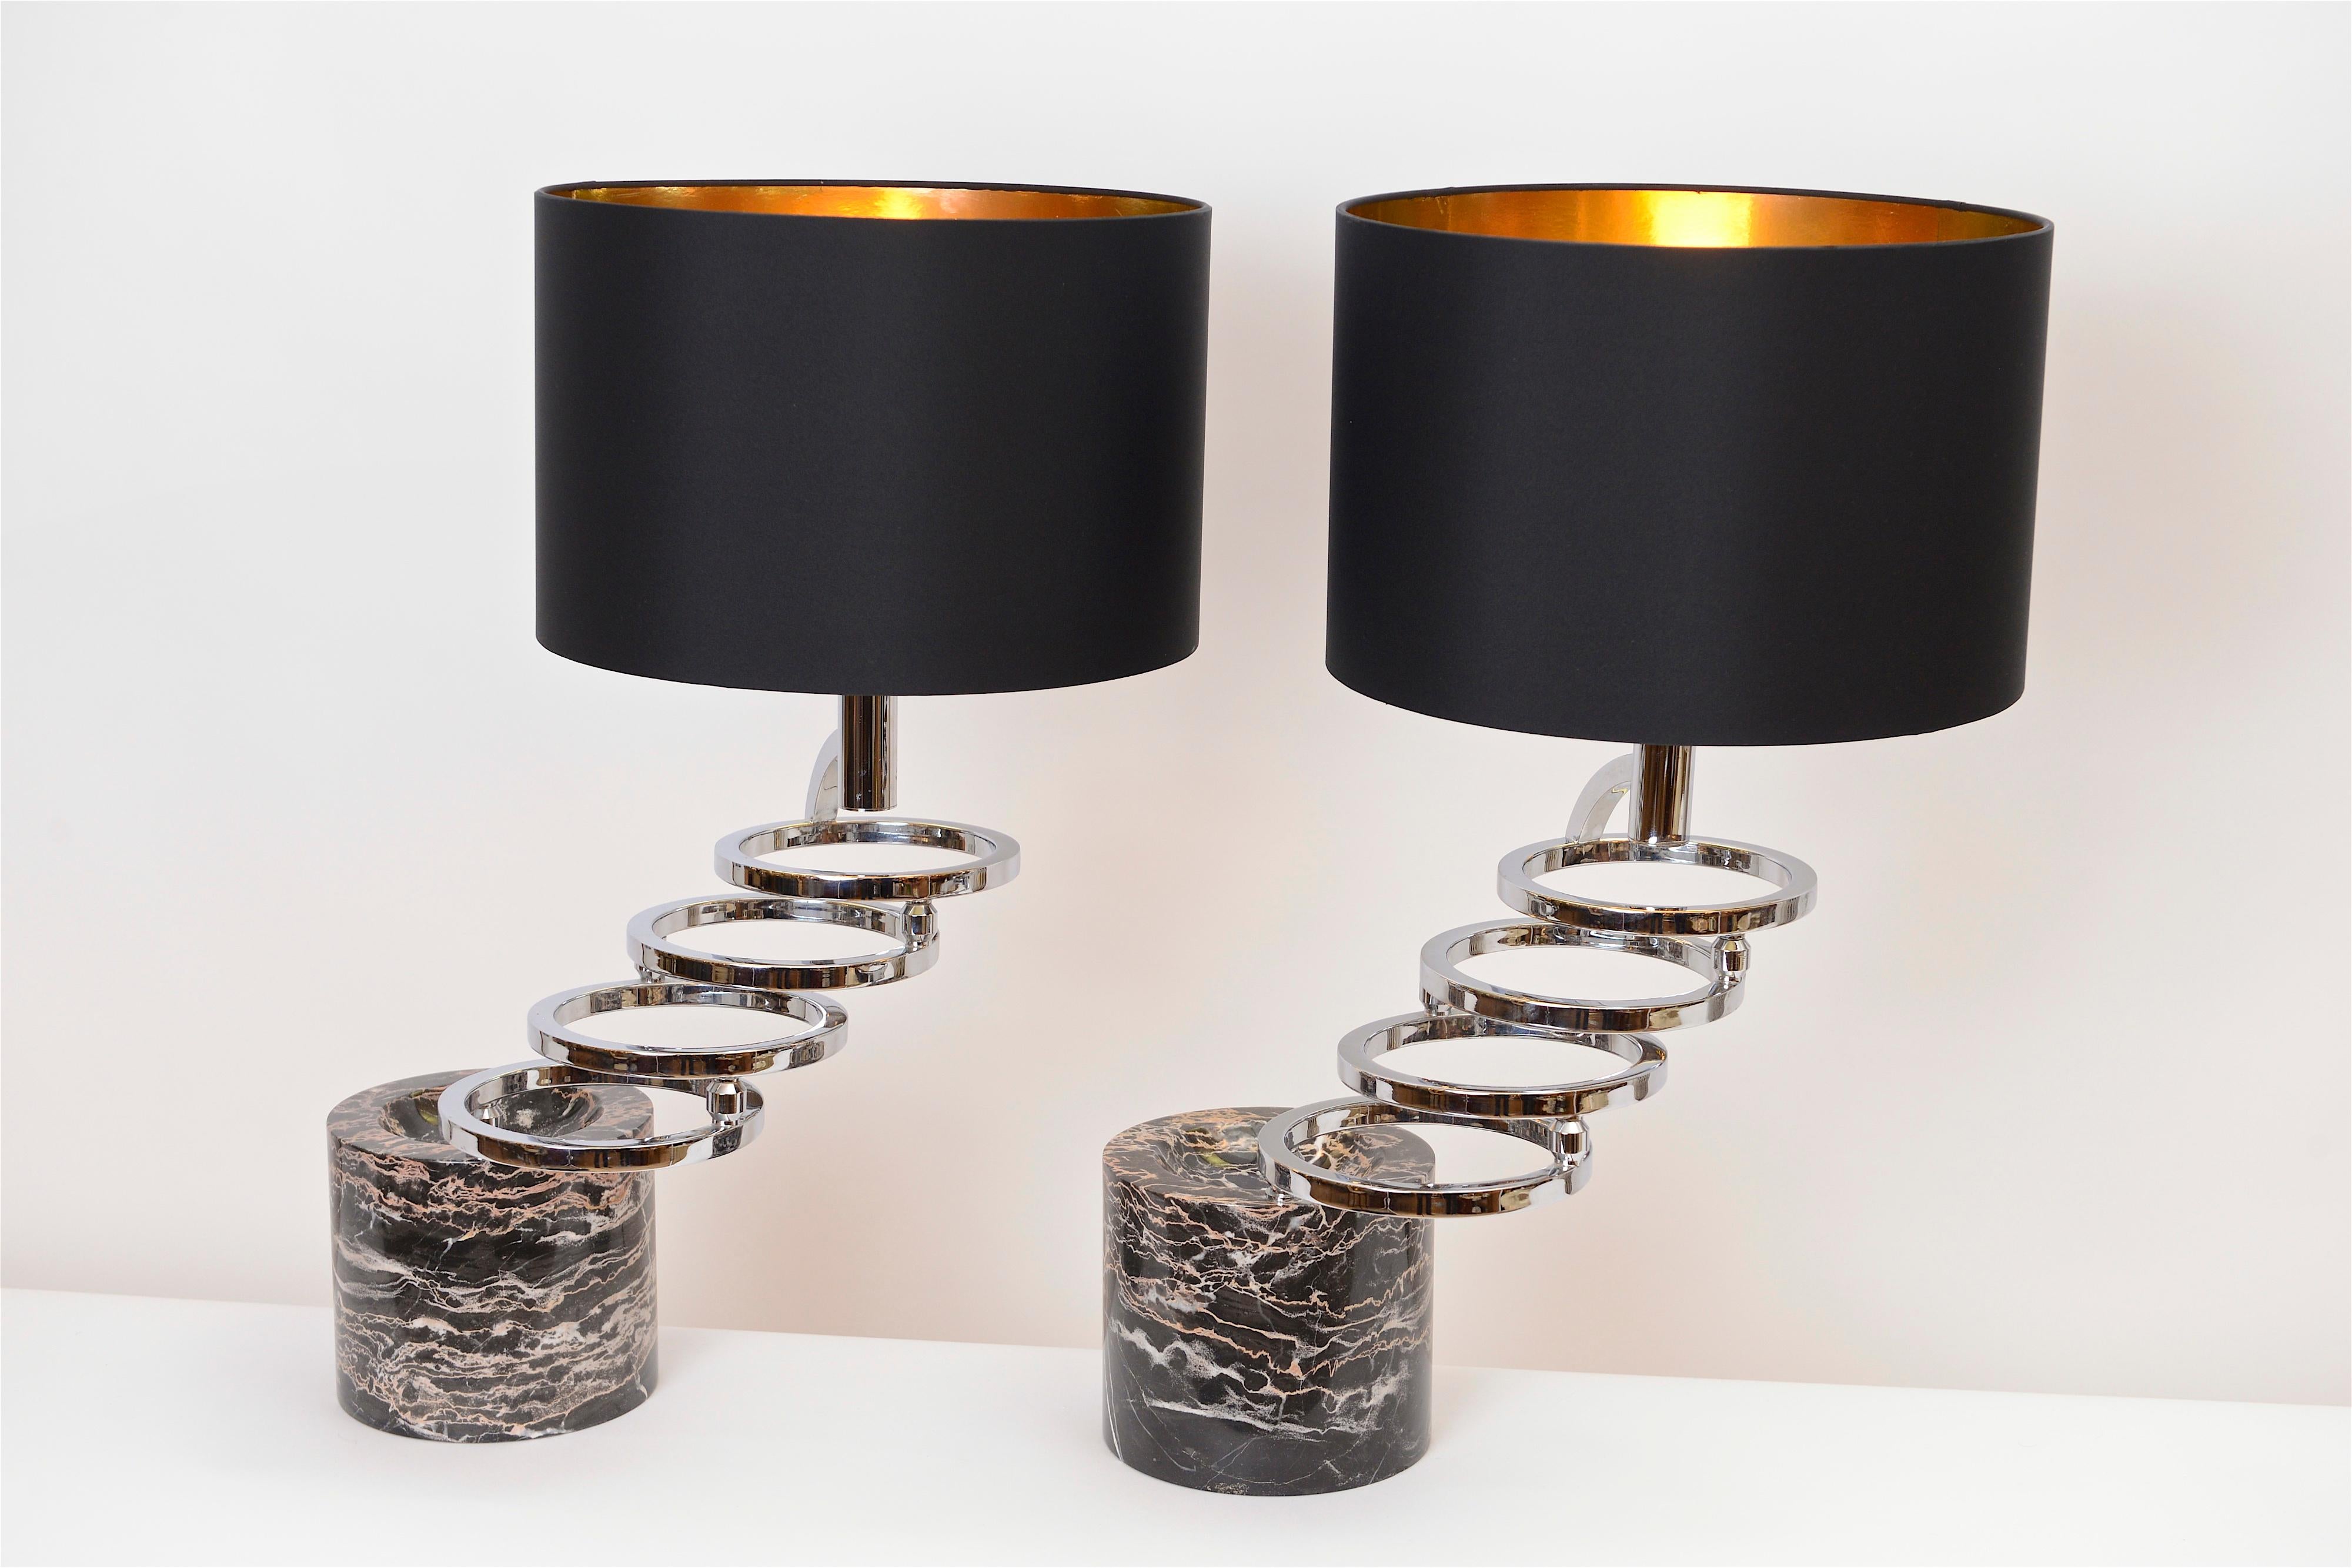 A fantastic pair of chrome and marble table lamps from the Florentine designer Giovanni Banci. Produced in the 1970s, these substantial lamps have a rare and beautiful marble base that features a concave cut-out on its surface. Its four chromed